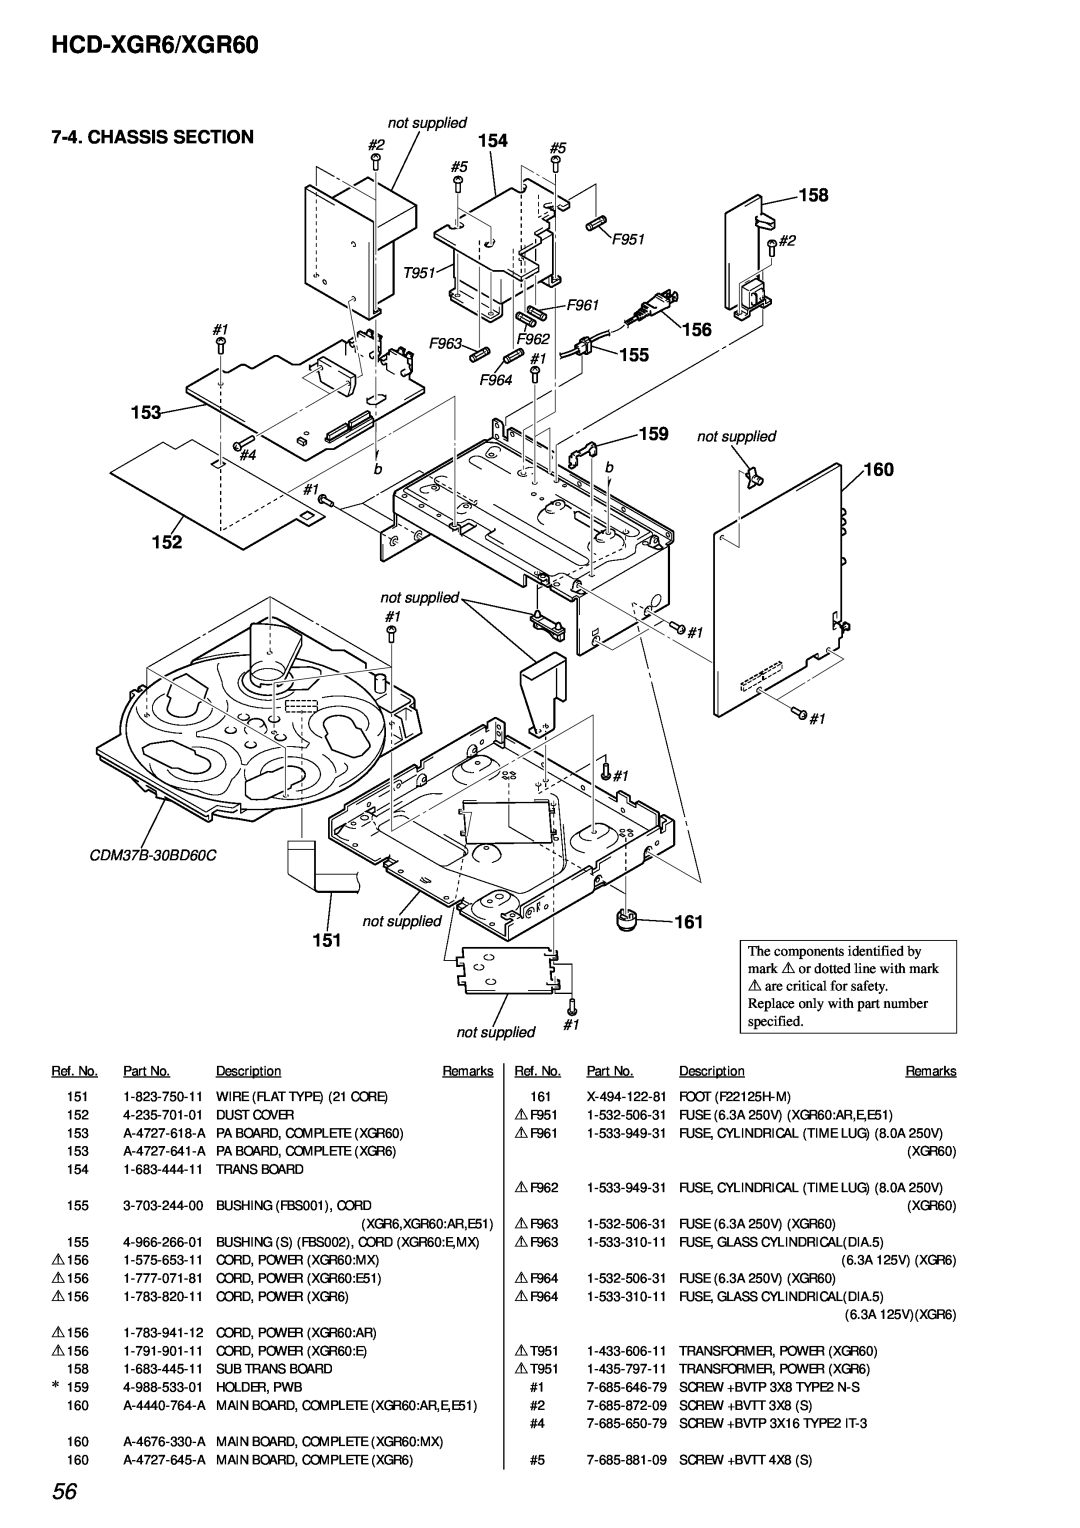 Sony HCD-XGR60 Chassis Section, 153 152, HCD-XGR6/XGR60, The components identified by, mark 0 or dotted line with mark 